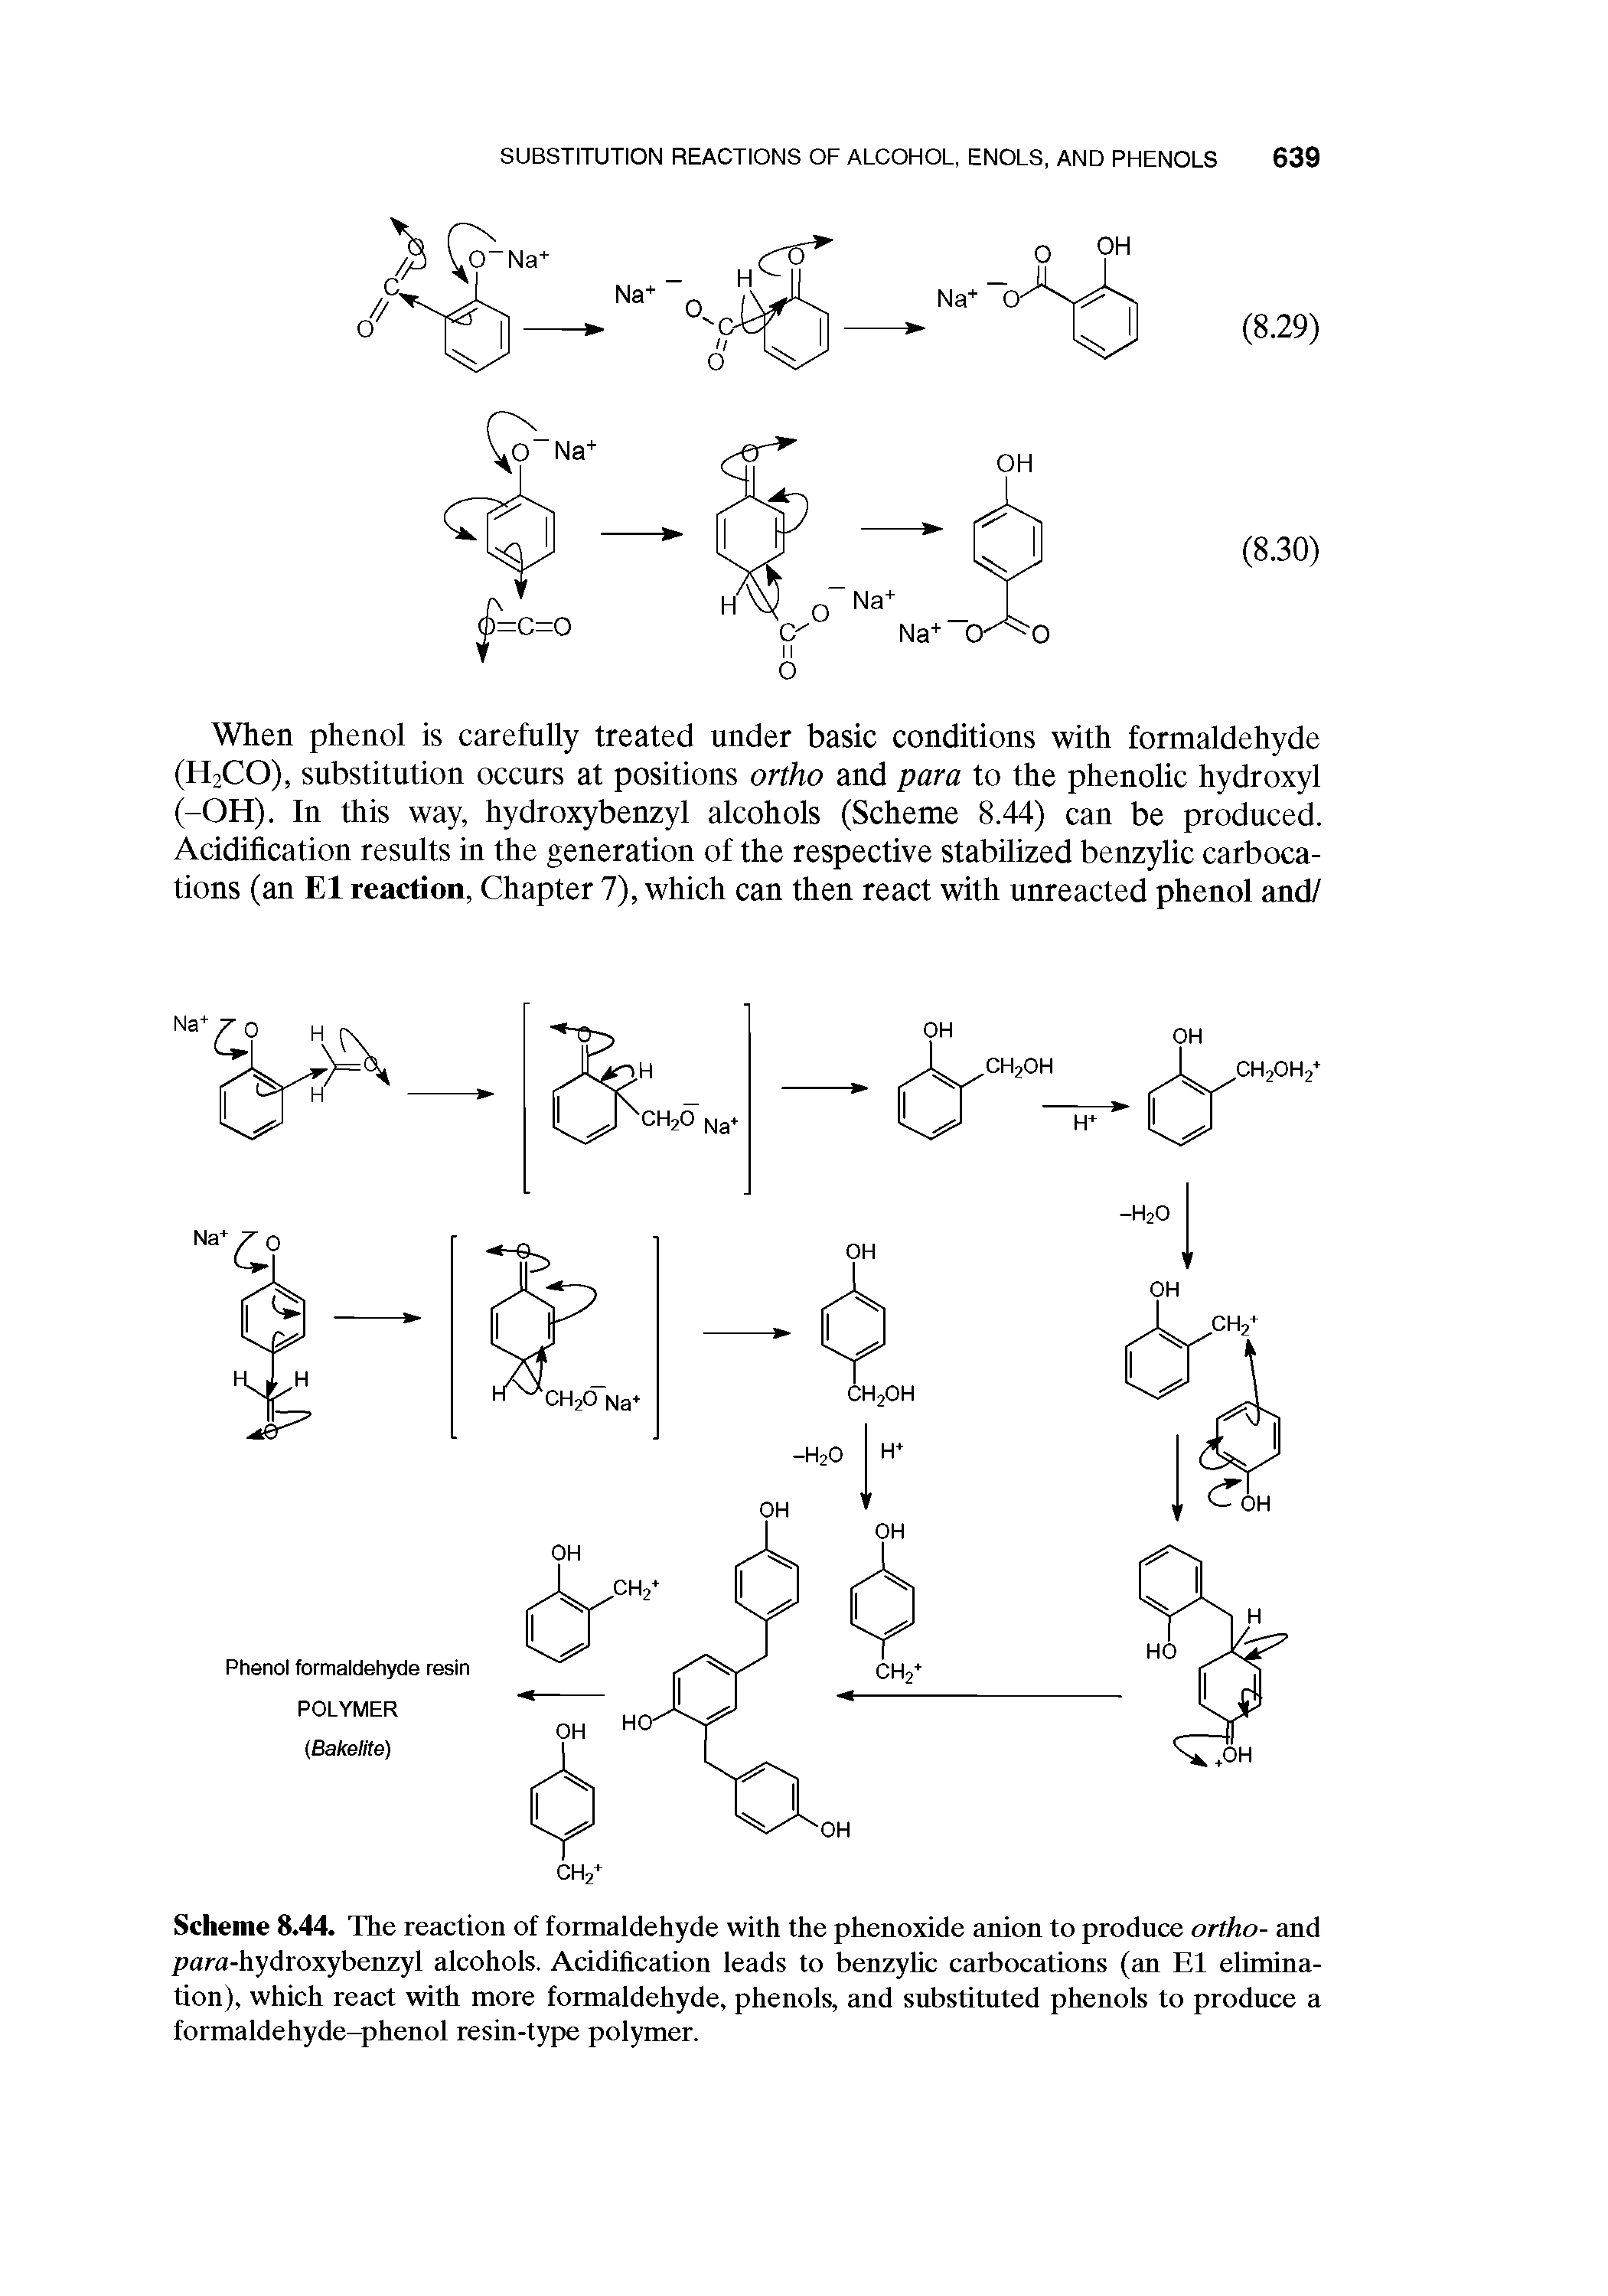 Scheme 8.44. The reaction of formaldehyde with the phenoxide anion to produce ortho- and para-hydroxybenzyl alcohols. Acidification leads to benzyhc carbocations (an El elimination), which react with more formaldehyde, phenols, and substituted phenols to produce a formaldehyde-phenol resin-type polymer.